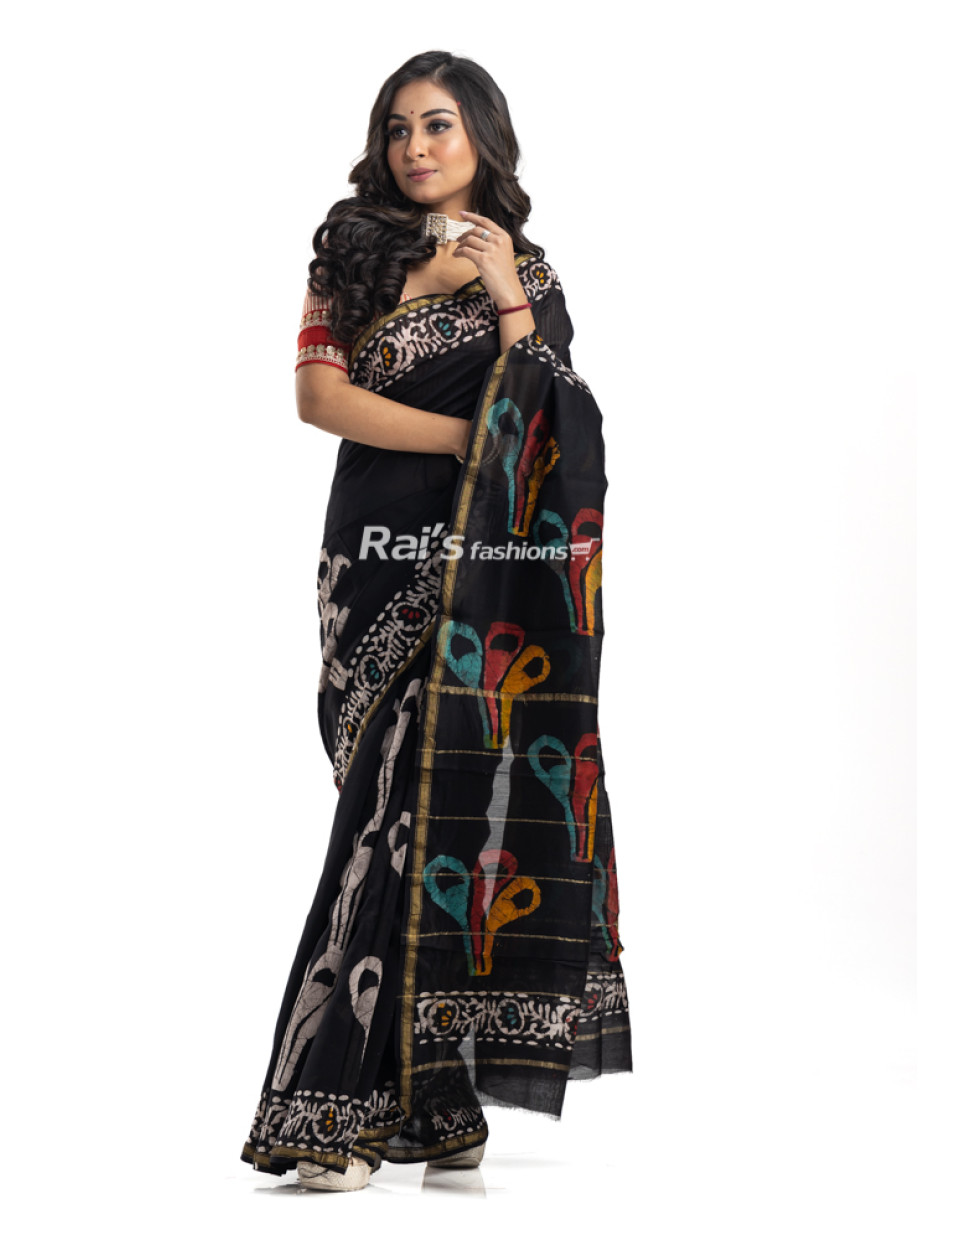 Black Chanderi Silk Saree With All Over Multicolor Print And Highlighted Golden Zari Border - Also Golden Zari Stripes On Pallu Section (KR2217)